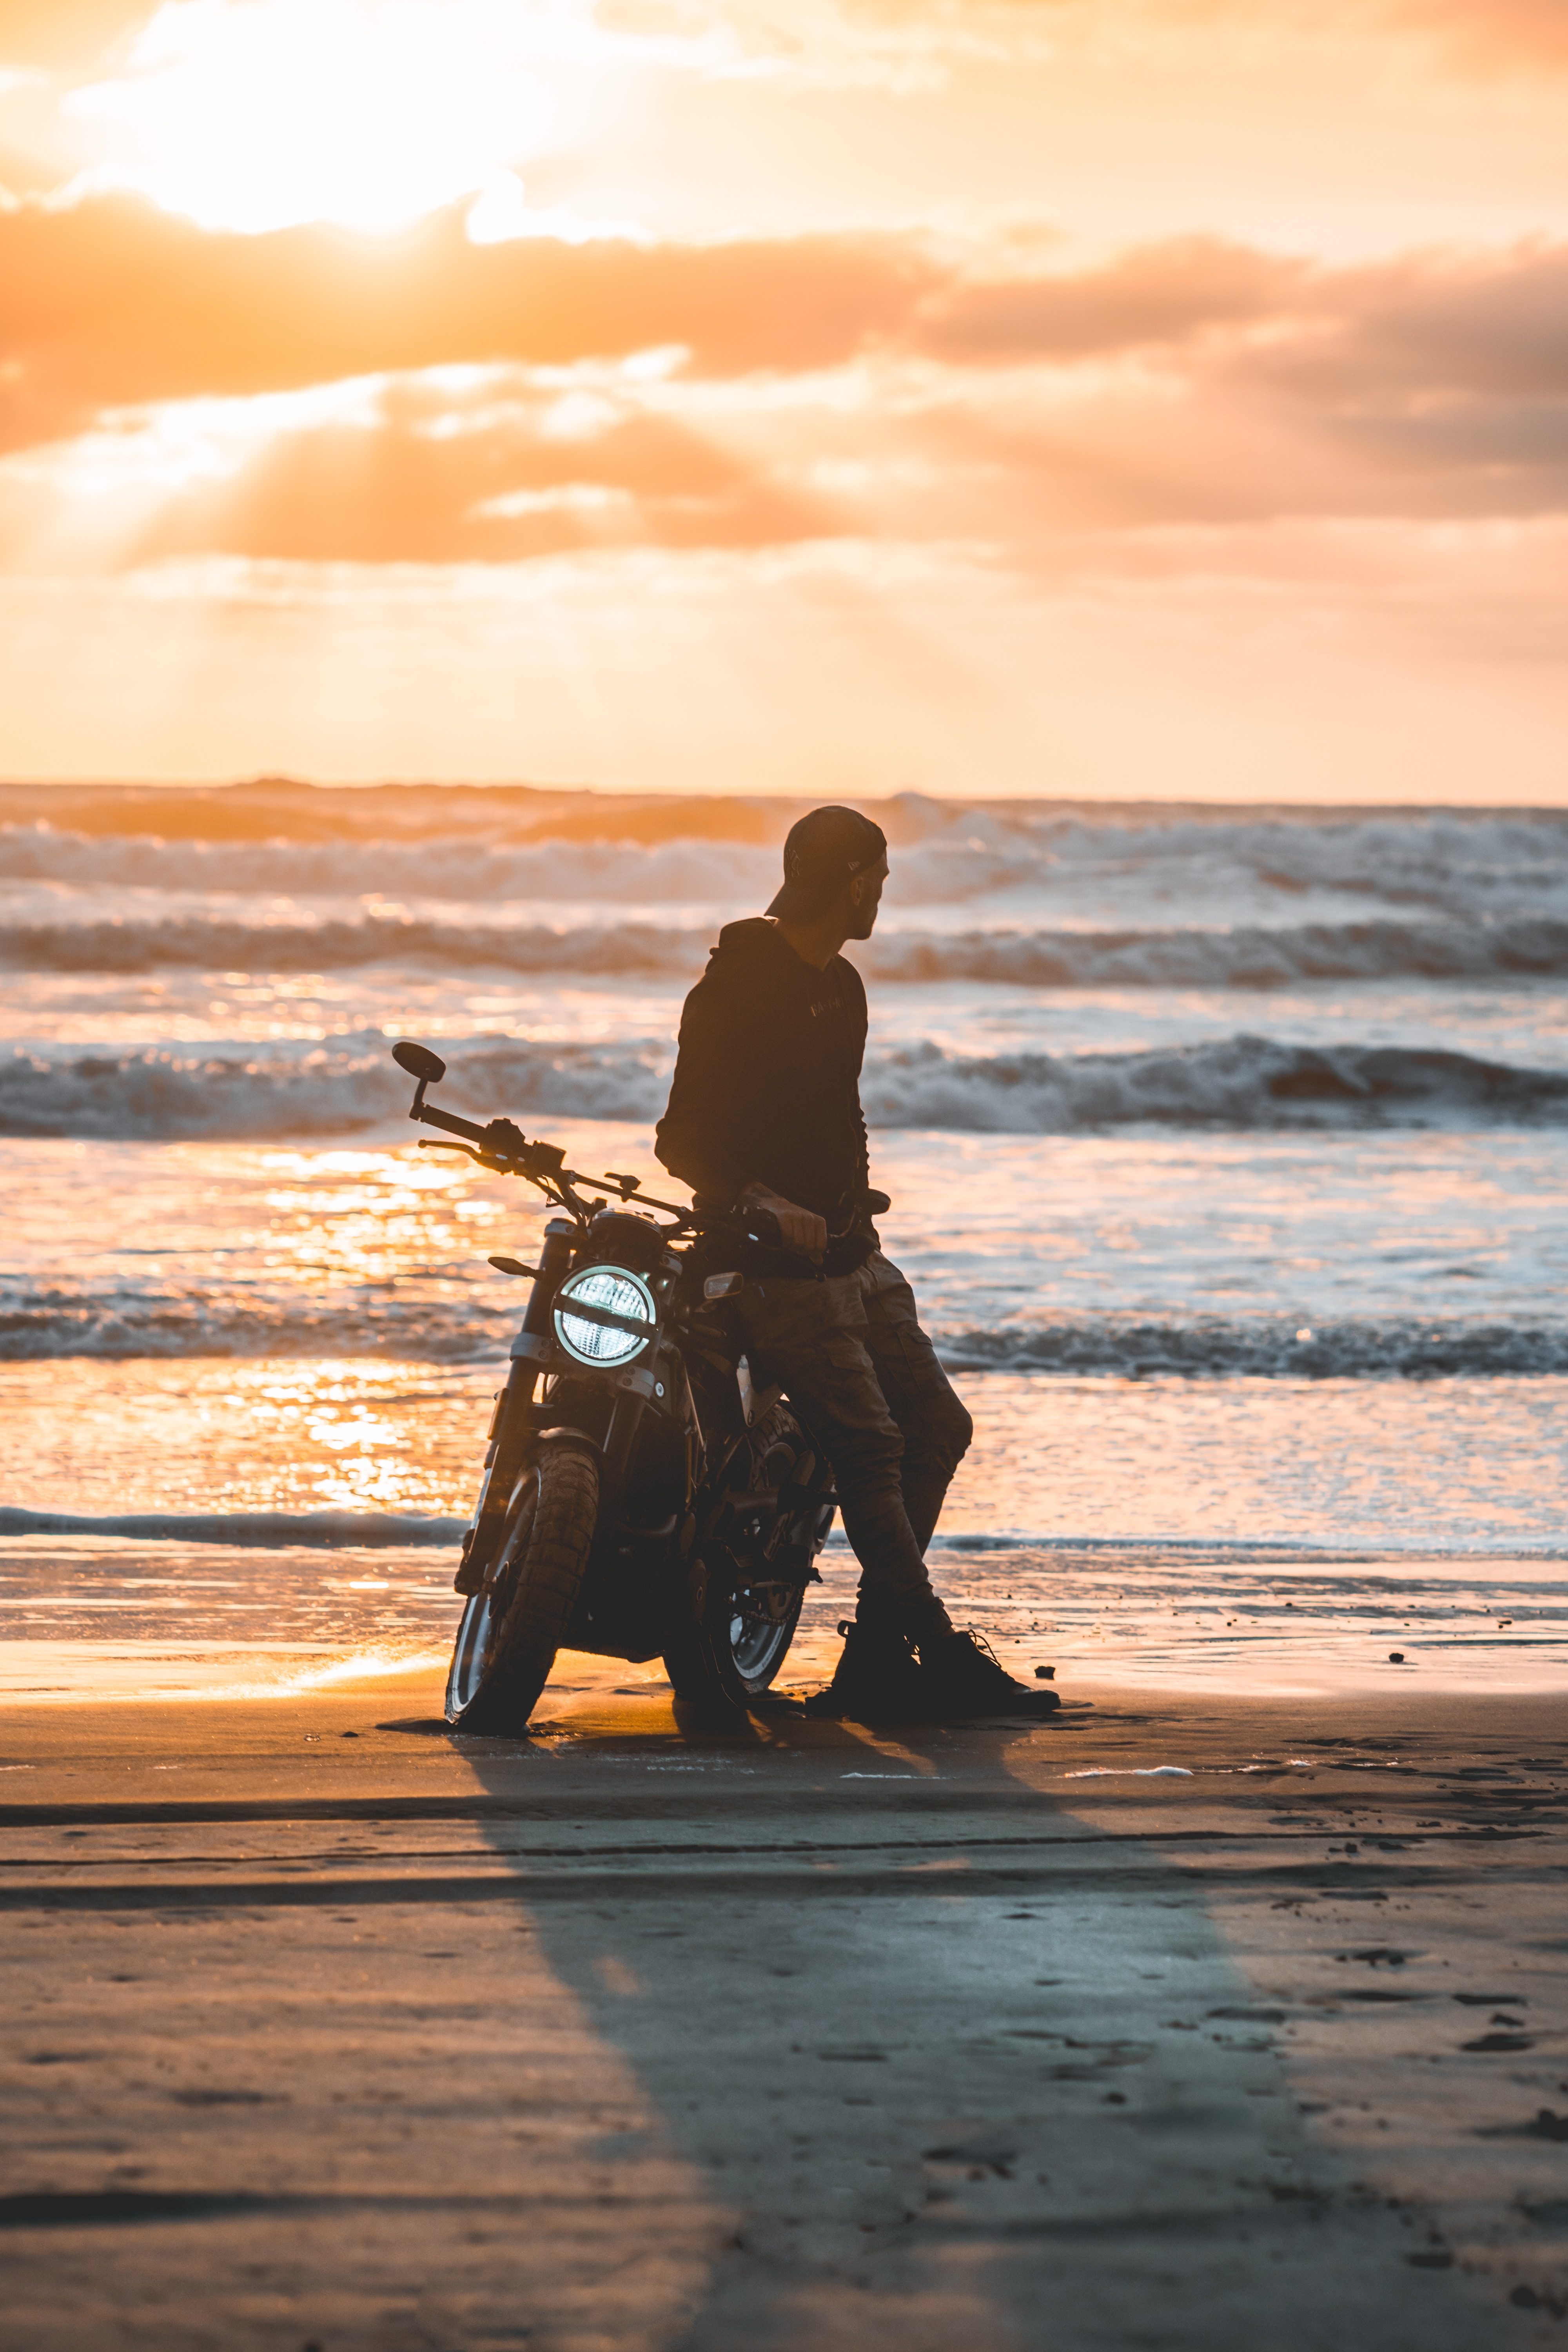 loneliness, motorcycle, motorcycles, motorcyclist, sunset, silhouette